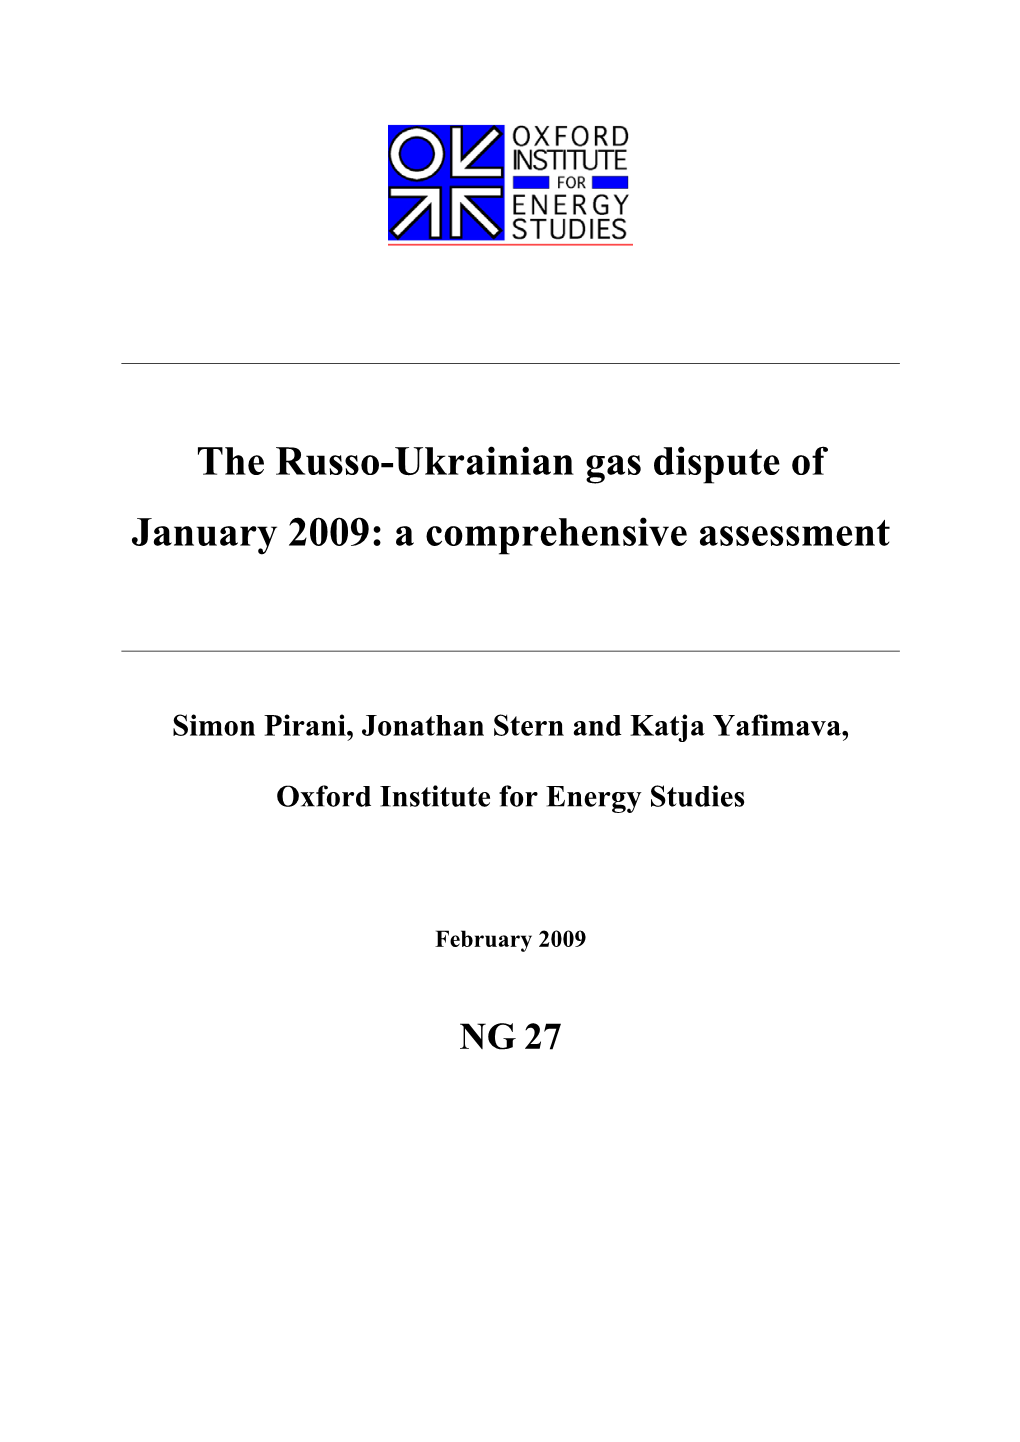 The Russo-Ukrainian Gas Dispute of January 2009: a Comprehensive Assessment